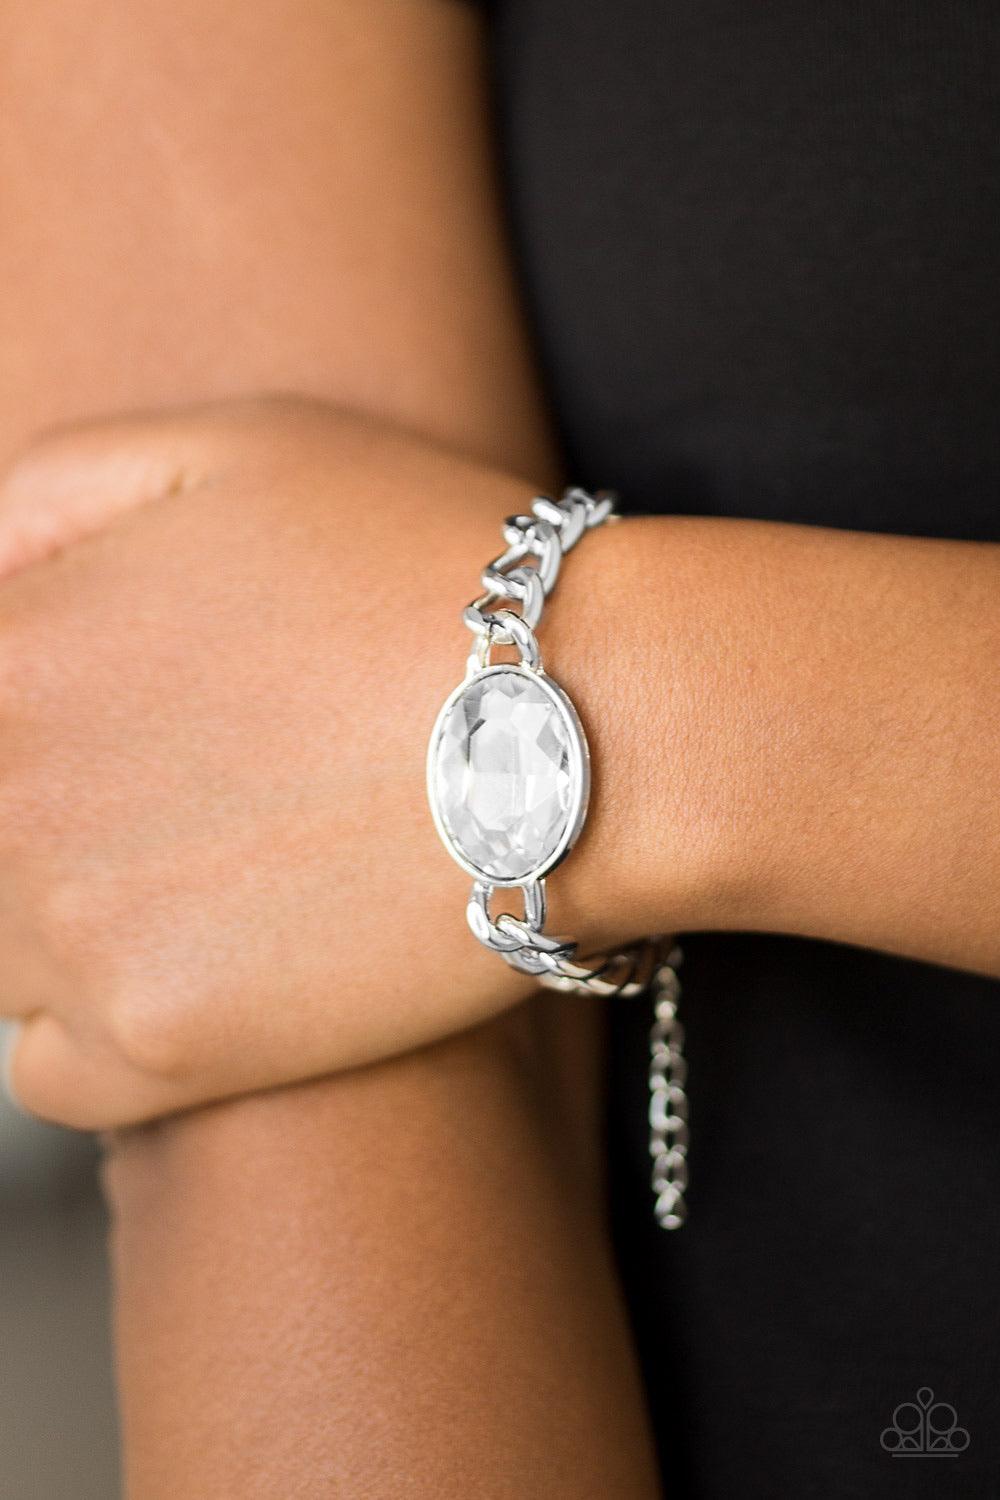 Paparazzi Accessories Luxury Lush - White An oversized white gem attaches to a bold silver chain, creating a dramatic centerpiece atop the wrist. Features an adjustable clasp closure. Jewelry